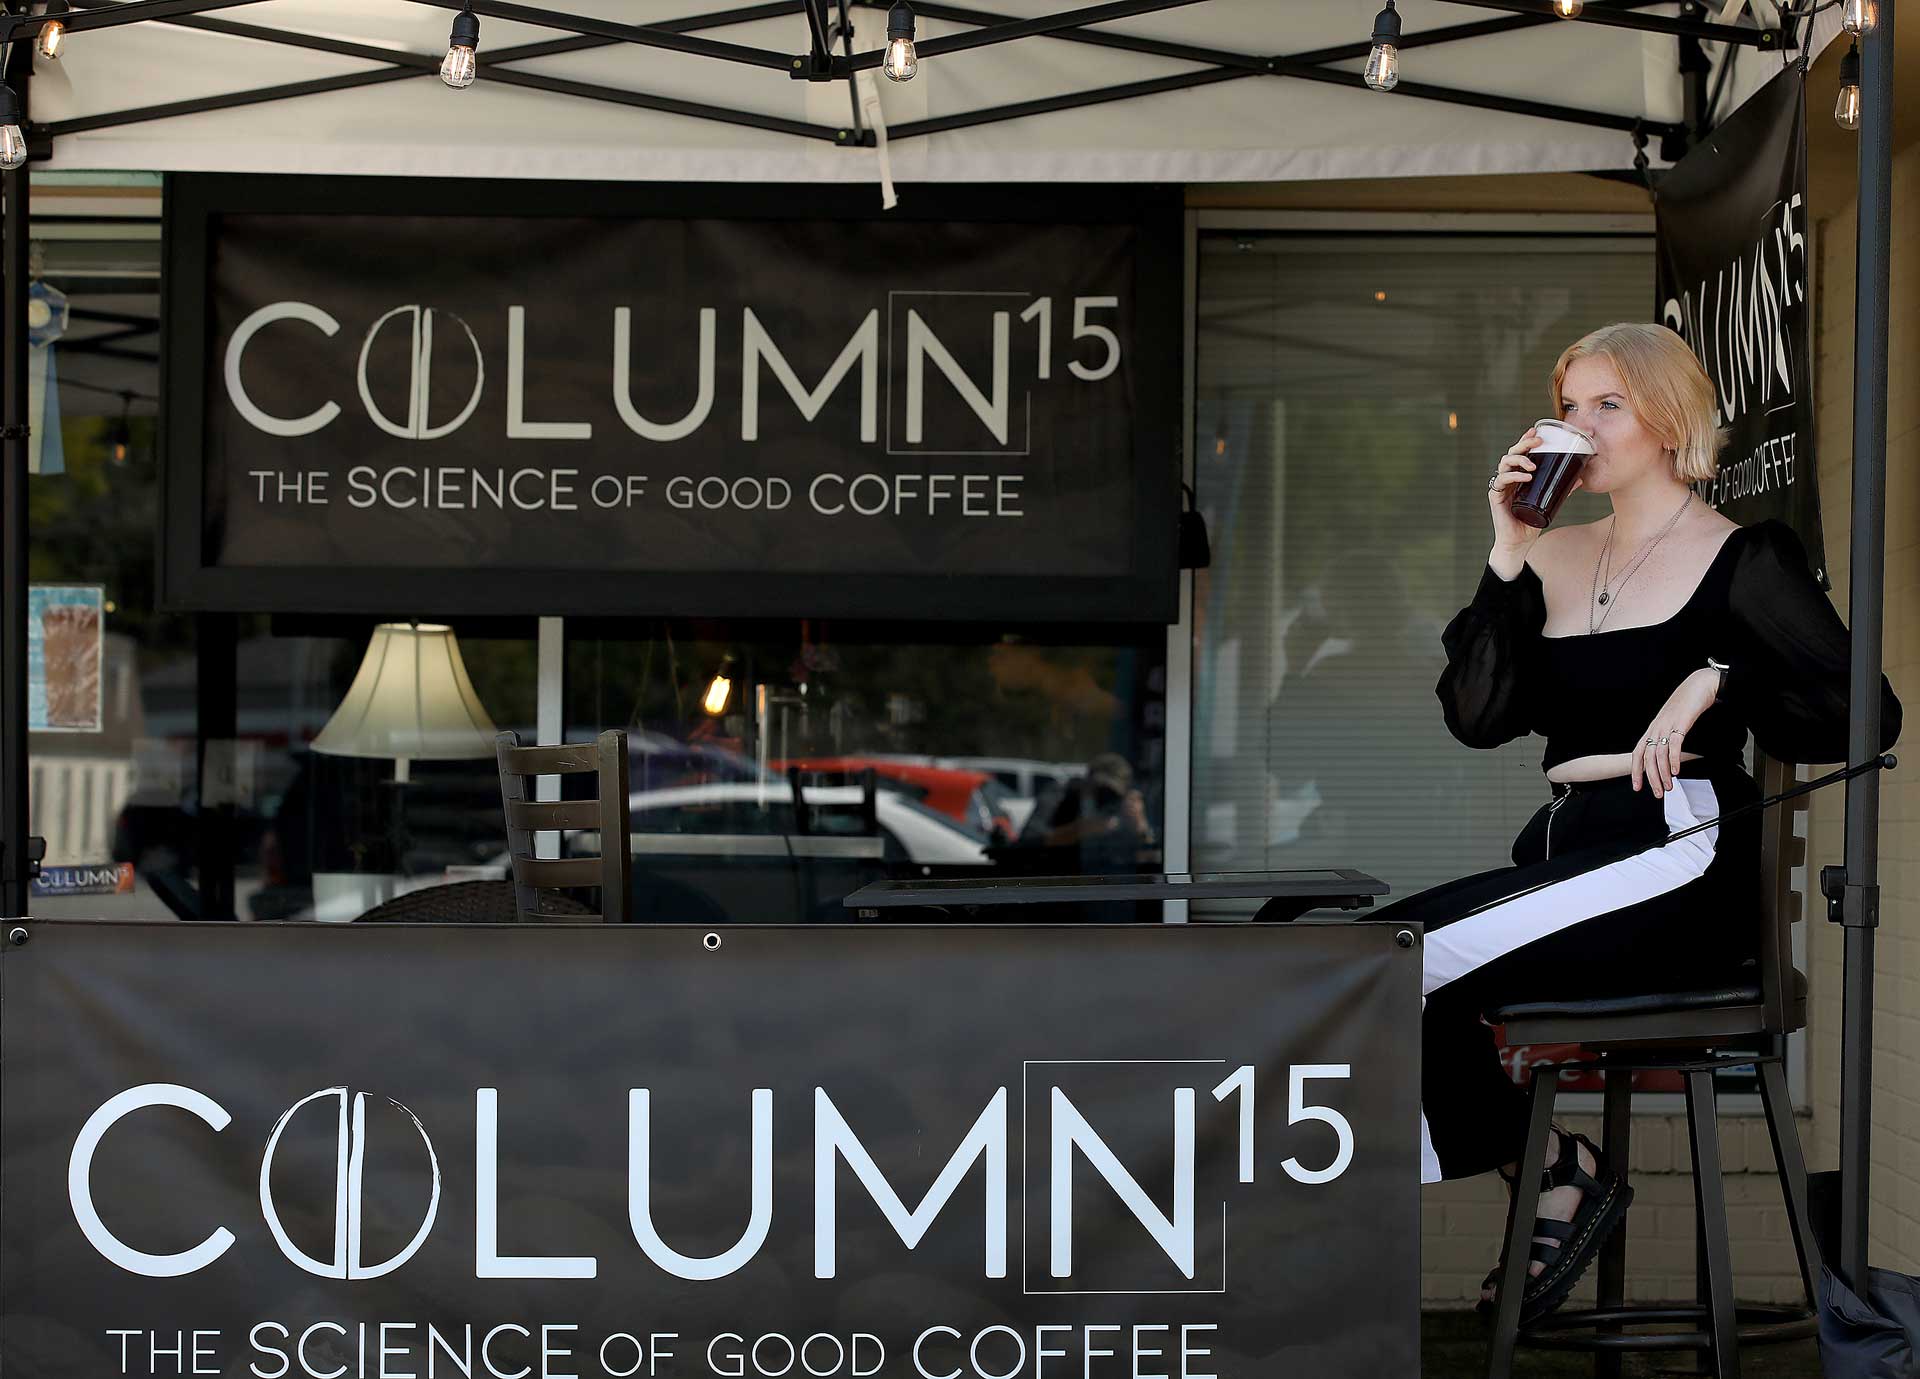 Enjoying unique coffee and tea beverages outside the Column 15 shop in the Edge District September 22, 2020.